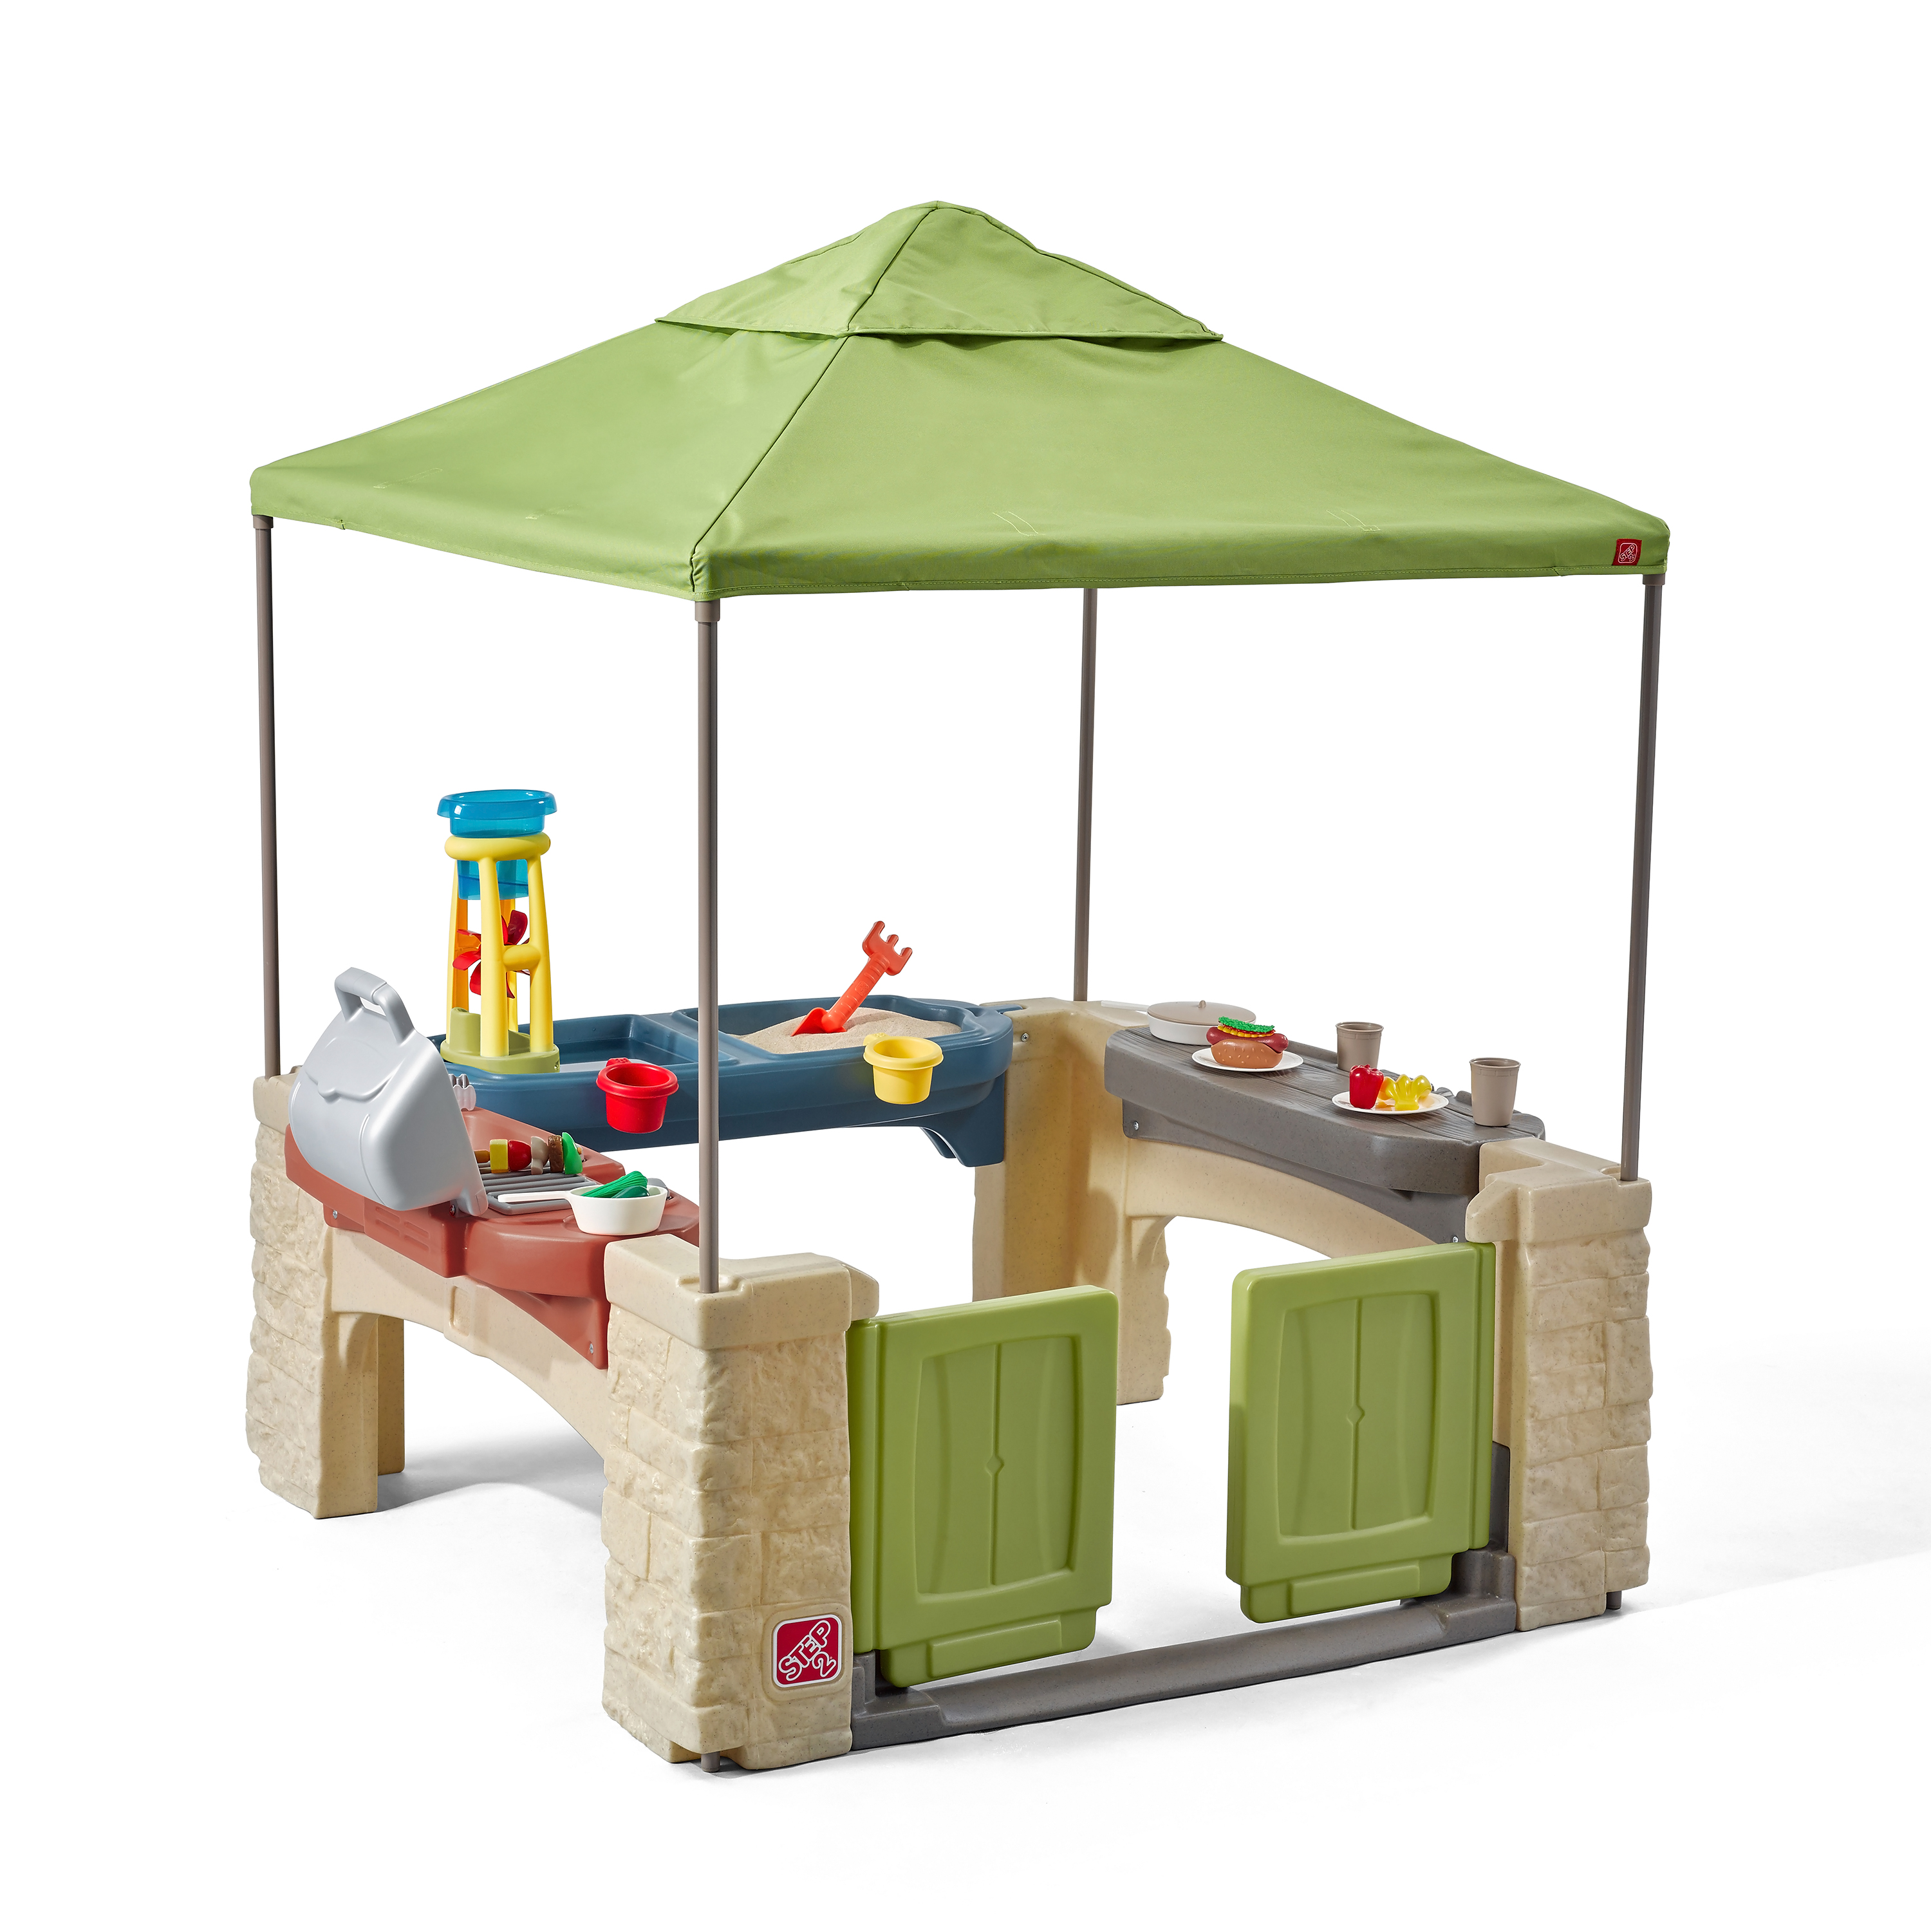 Step2 All-Around Playtime Patio with Canopy with 16 Play Accessories Playhouse Kids Outdoor Toys - image 3 of 21